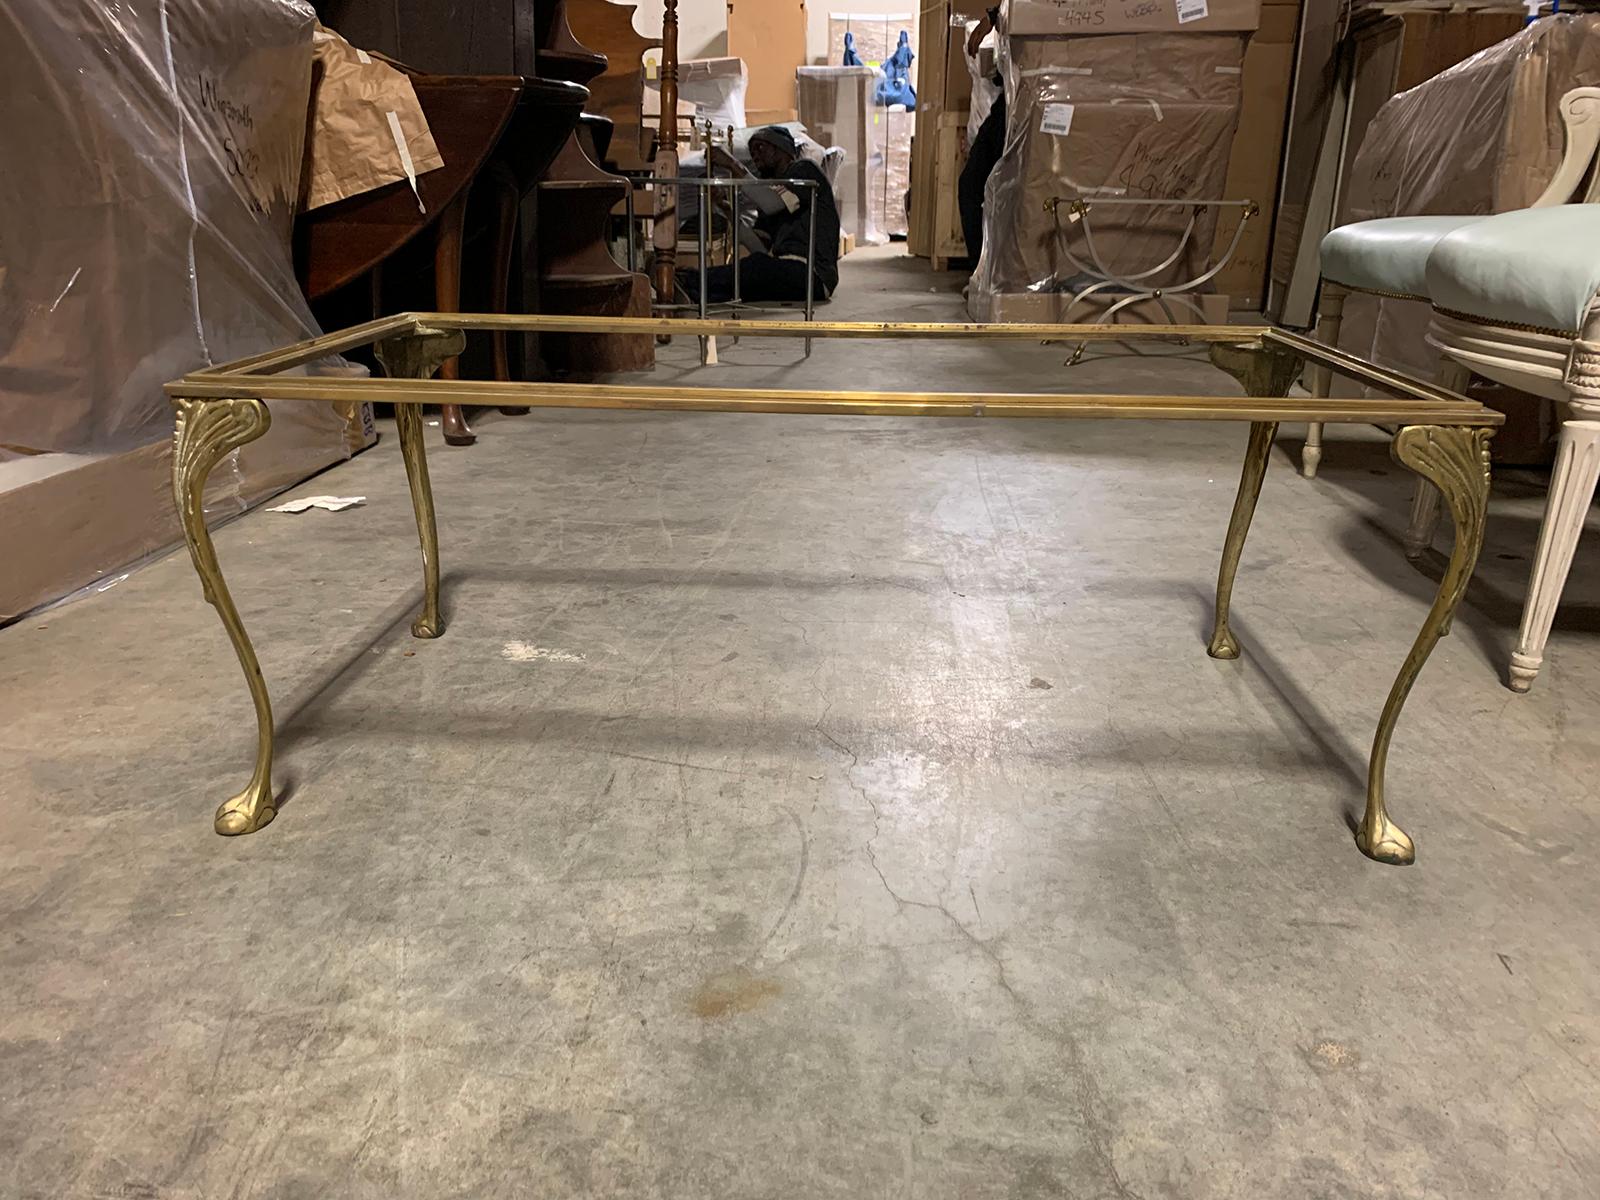 20th century French brass bronze coffee table base
Base only, top not included.